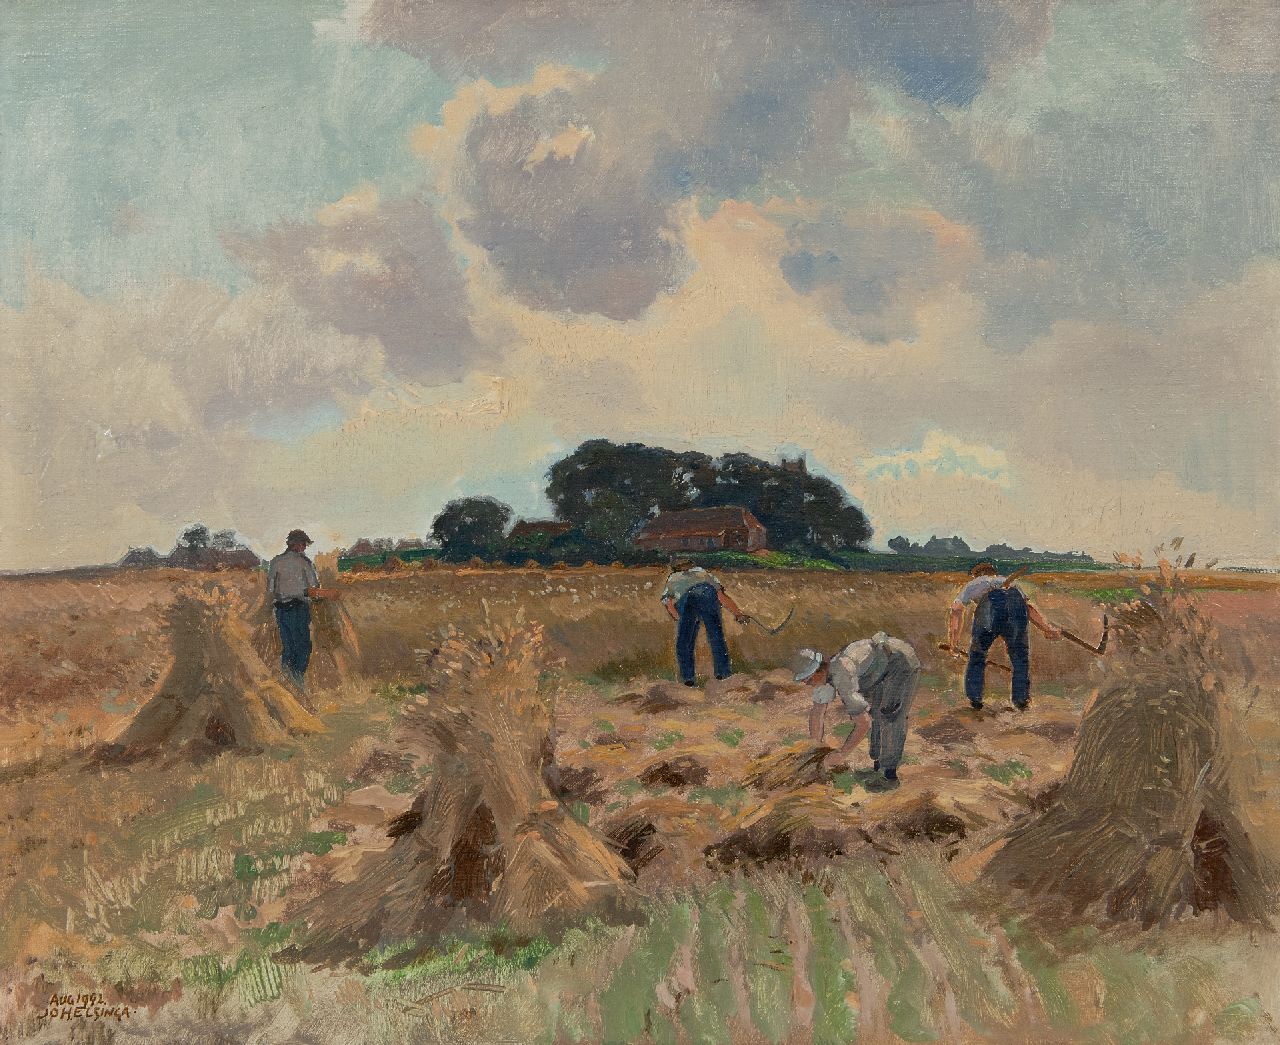 Elsinga J.  | Johannes 'Joh' Elsinga | Paintings offered for sale | Harvest time, oil on canvas 46.1 x 56.1 cm, signed l.l. and dated Aug 1942